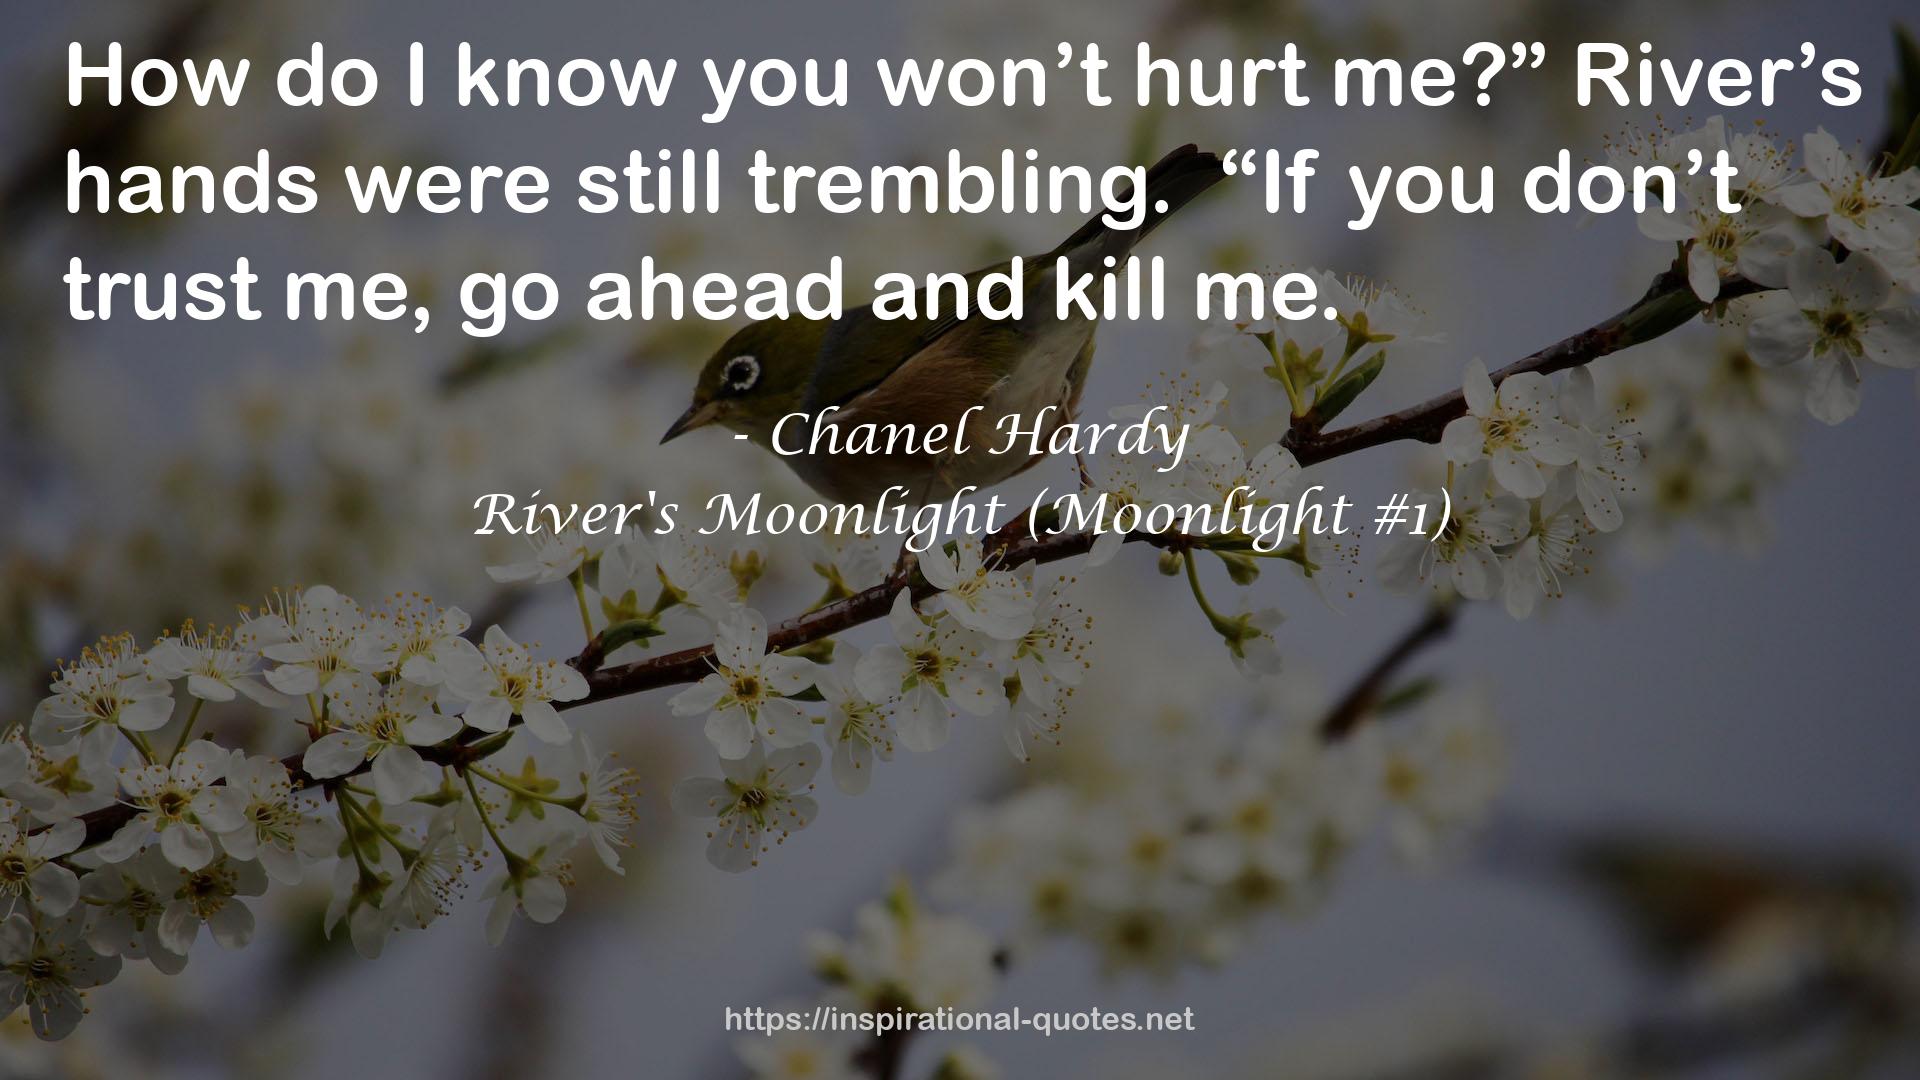 Chanel Hardy QUOTES